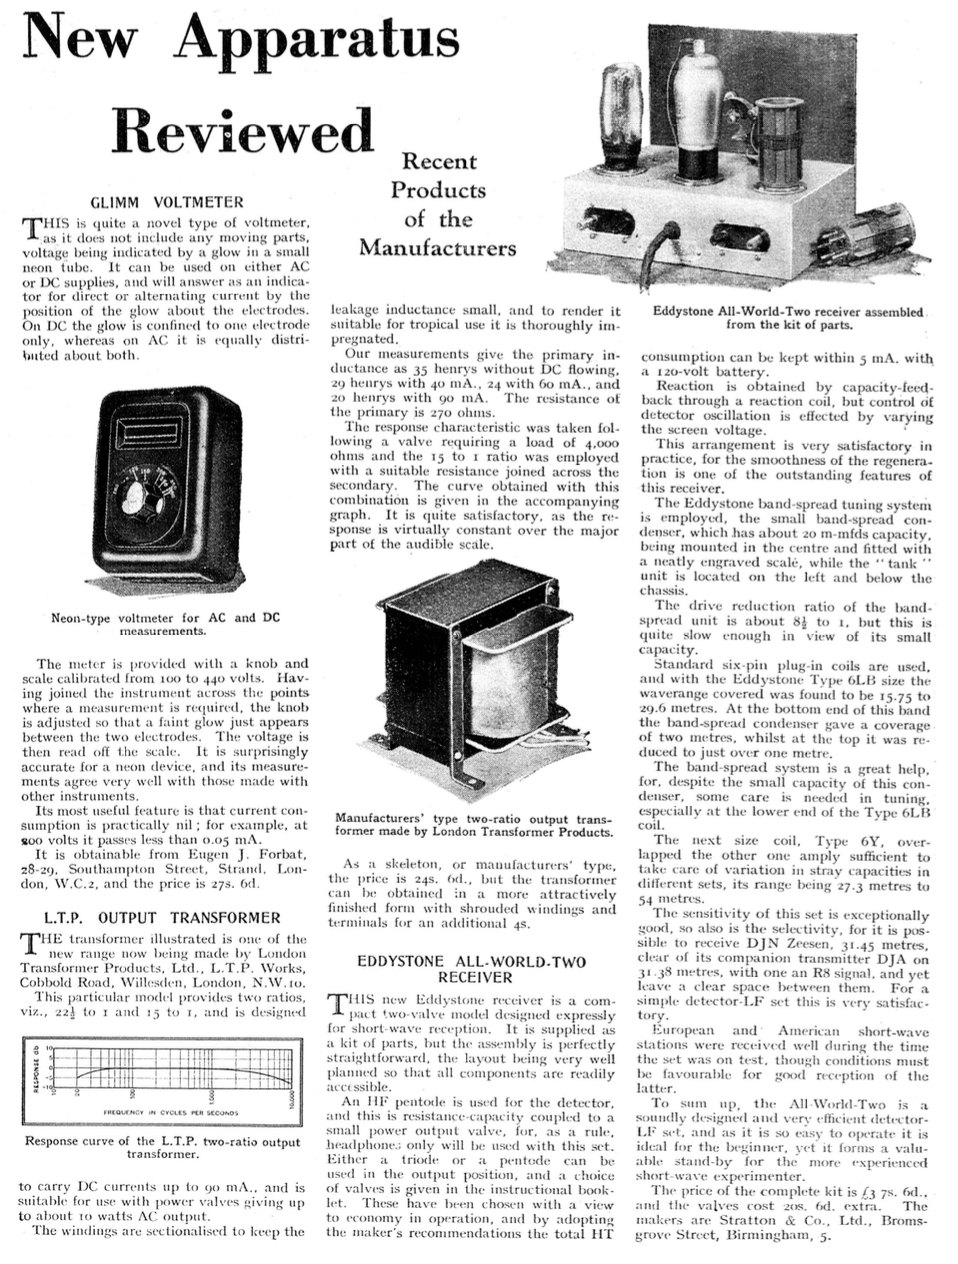 Eddystone All World Two - Article in Wireless World (1936-06)